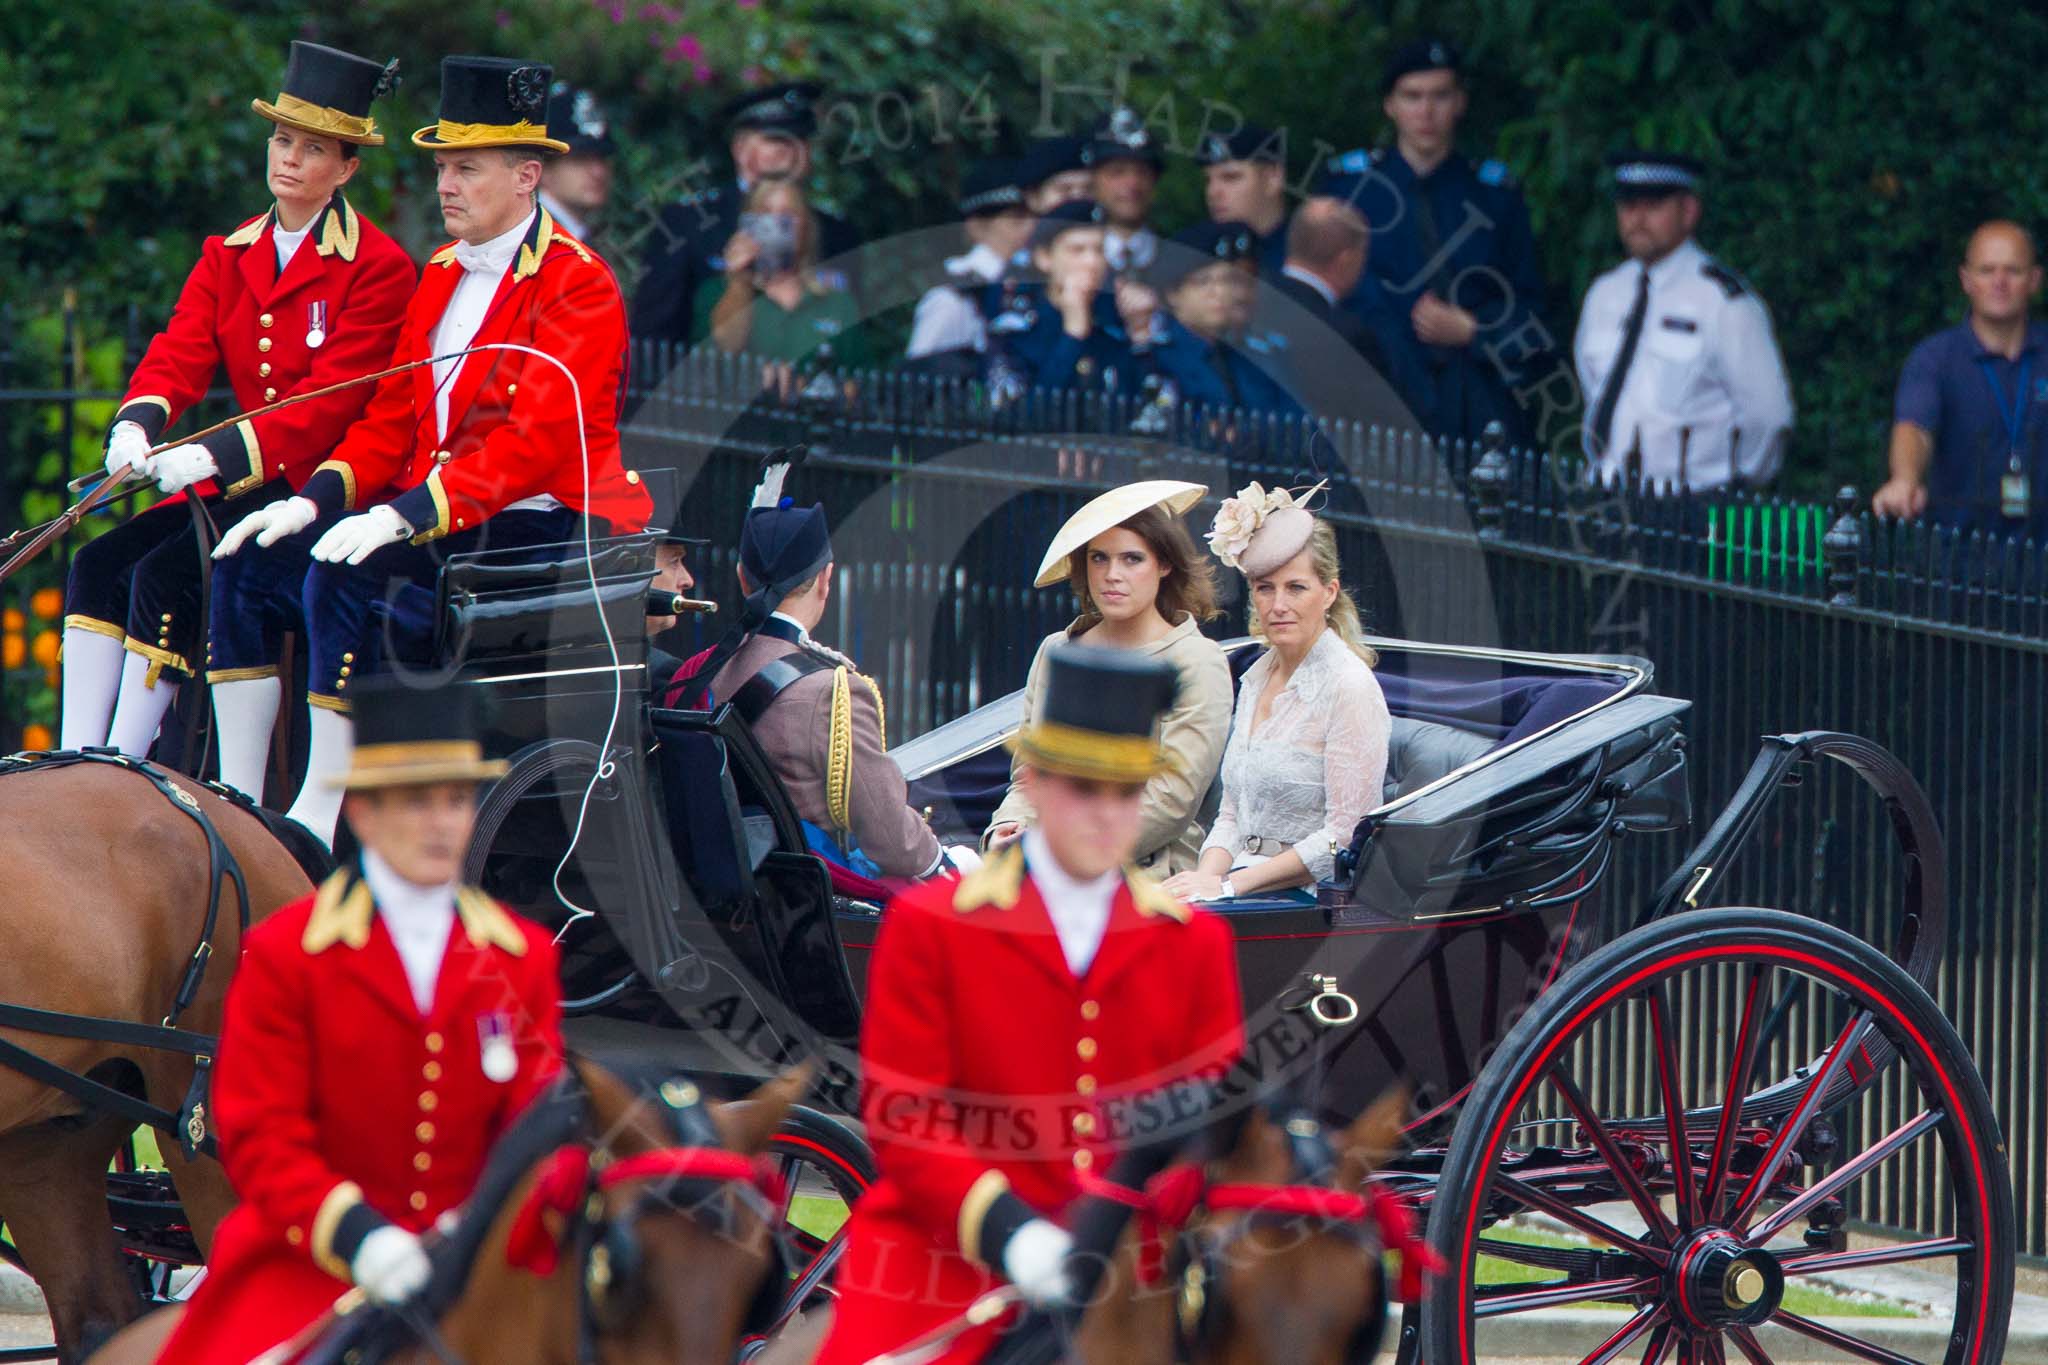 Trooping the Colour 2014.
Horse Guards Parade, Westminster,
London SW1A,

United Kingdom,
on 14 June 2014 at 10:49, image #269